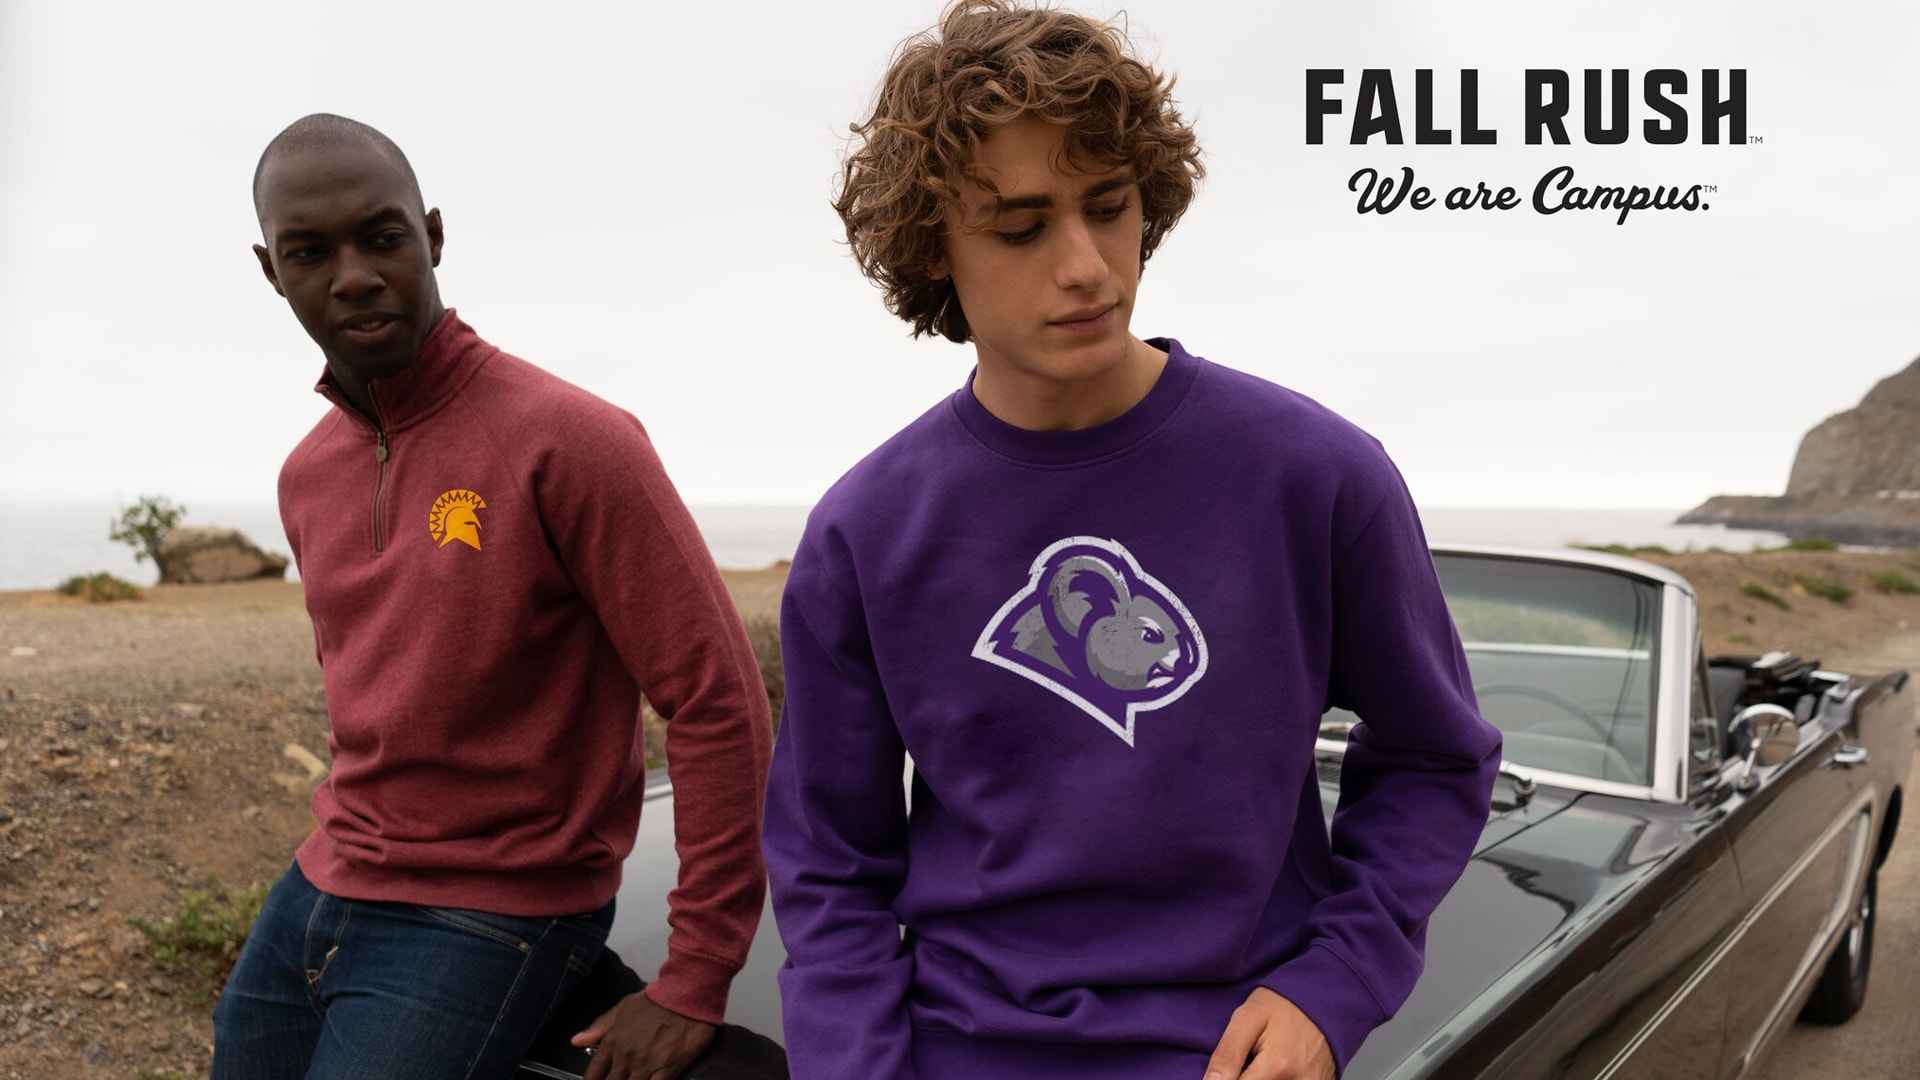 Educational products provider Follett expands into apparel, launches private label Fall Rush’